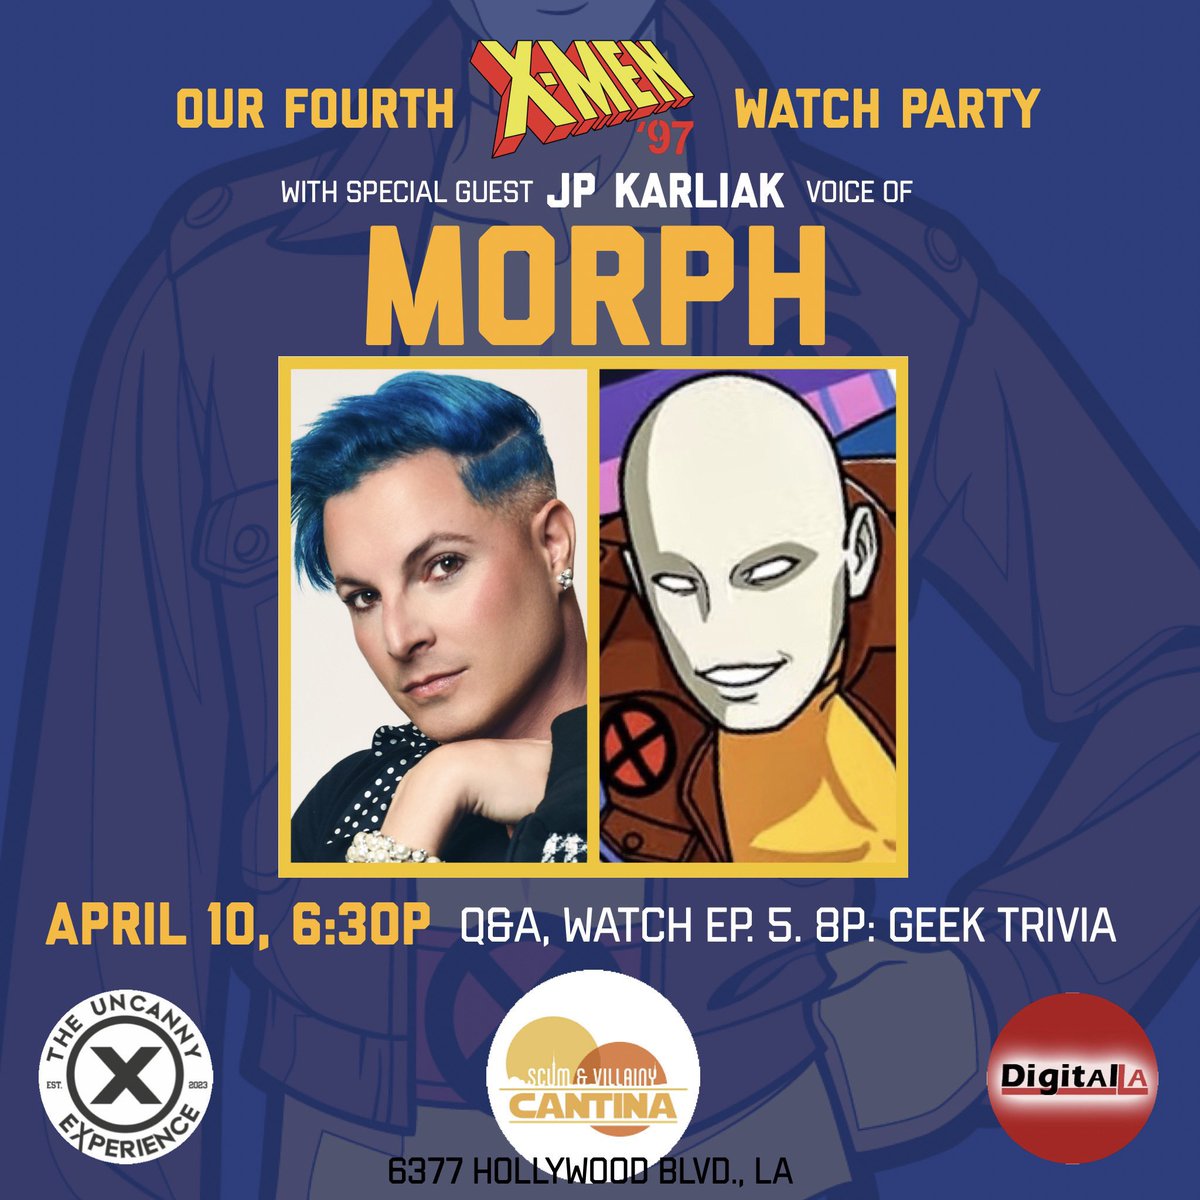 ❌ Join our watch party for the new X-Men ‘97 ep “Remeber It” w/ guest @jpkarliak the voice of Morph this Wednesday at 6:30pm at Scum & Villainy Cantina in Hollywood! W/ Q&A 🙋‍♂️ screening 📺 & group photo op 📸 Presented by: @theuncannyexp & @digitalla See you there, mutants!